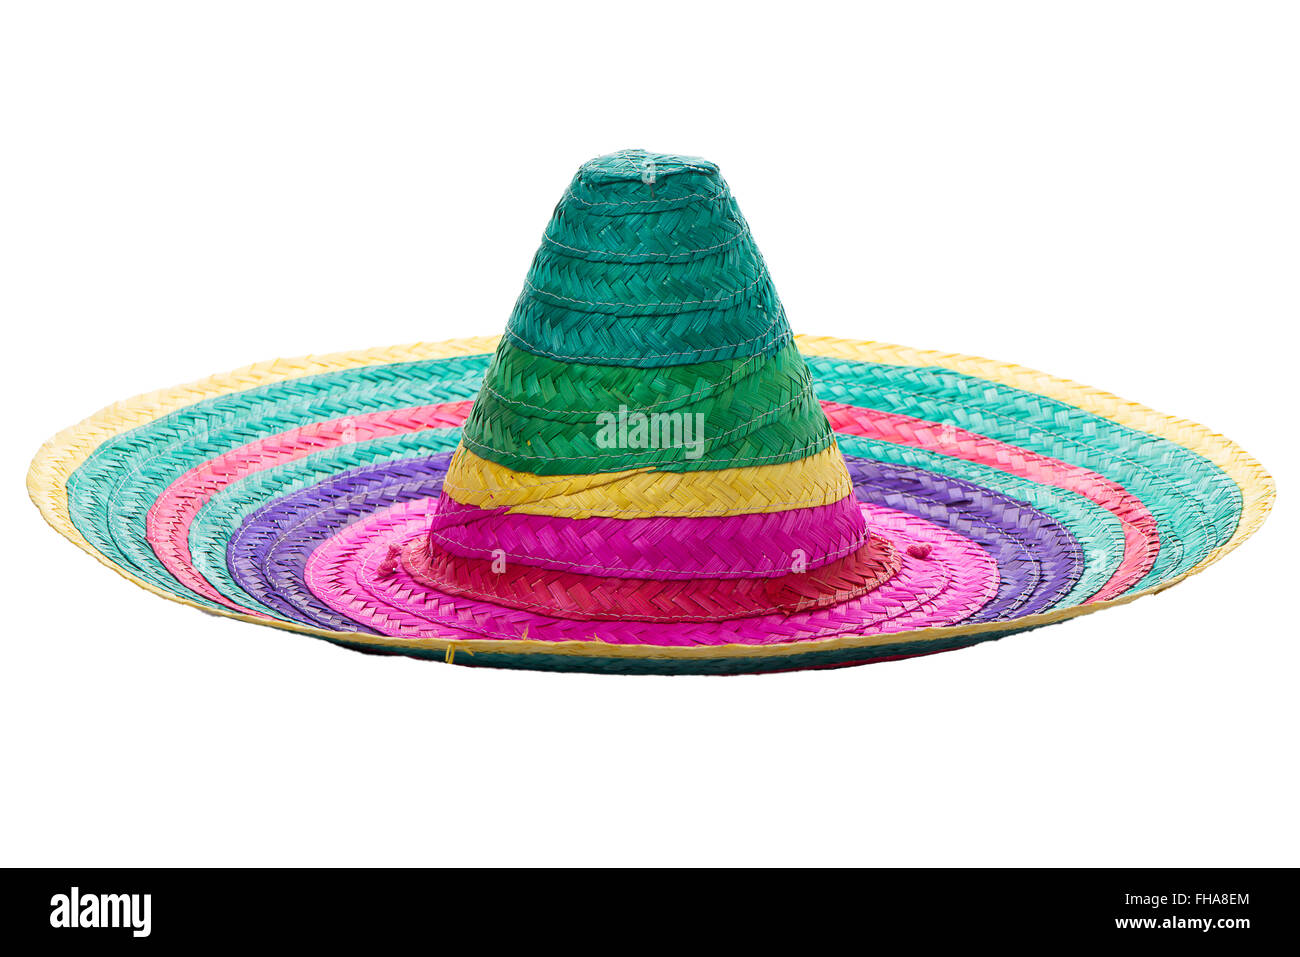 Colorful mexican sombrero on a white background. Stock Photo